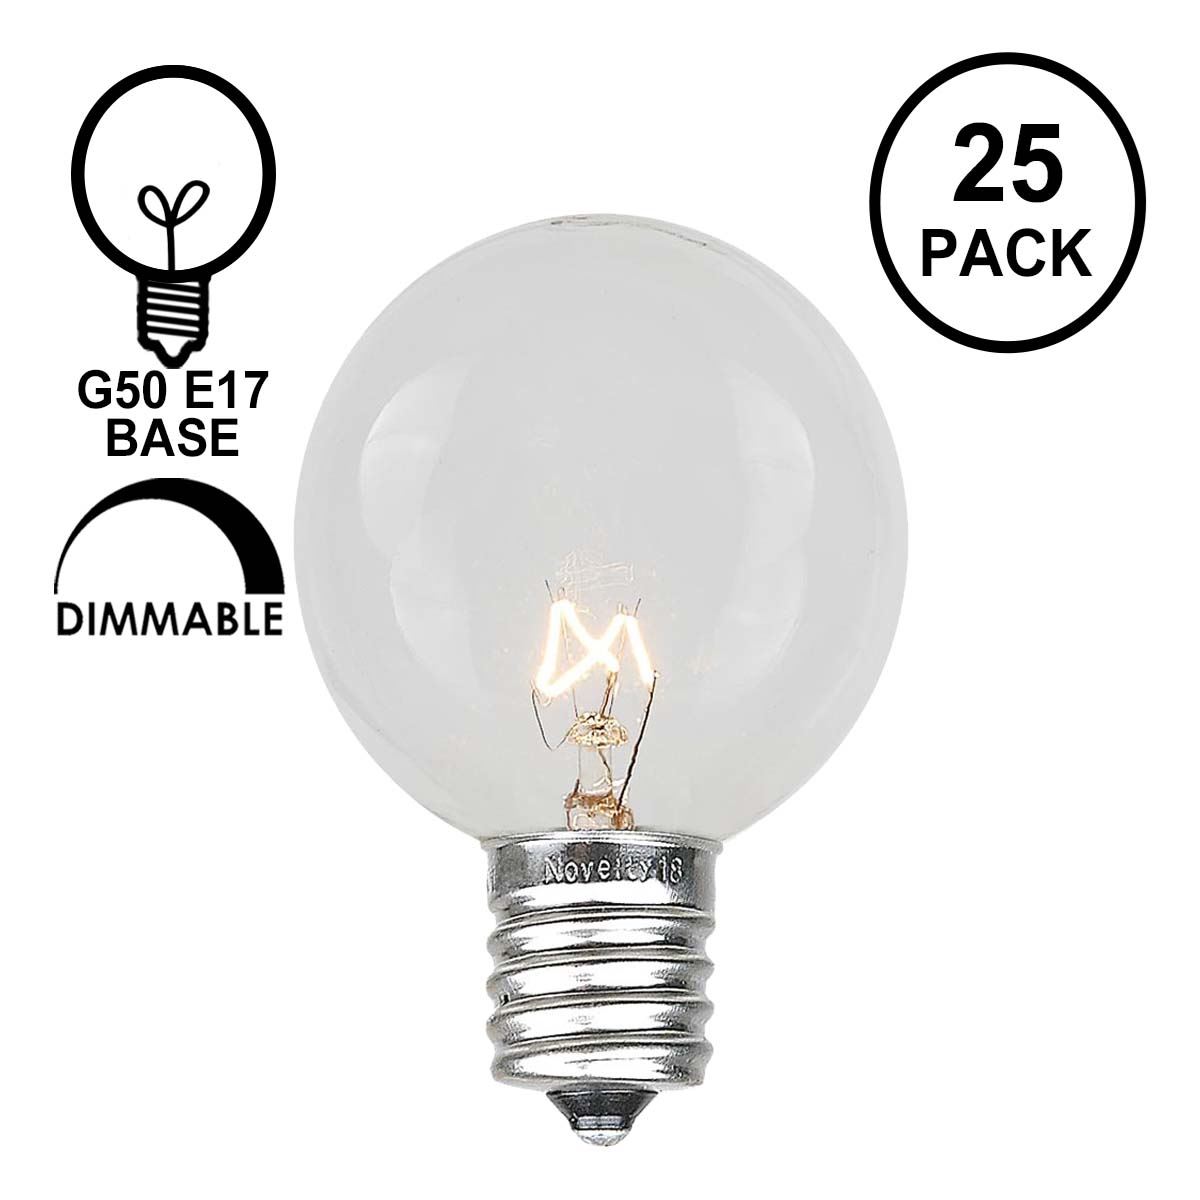 Clear G40 Globe Light Bulbs For Patio String Lights Fits E12 and C7 25 Pack 